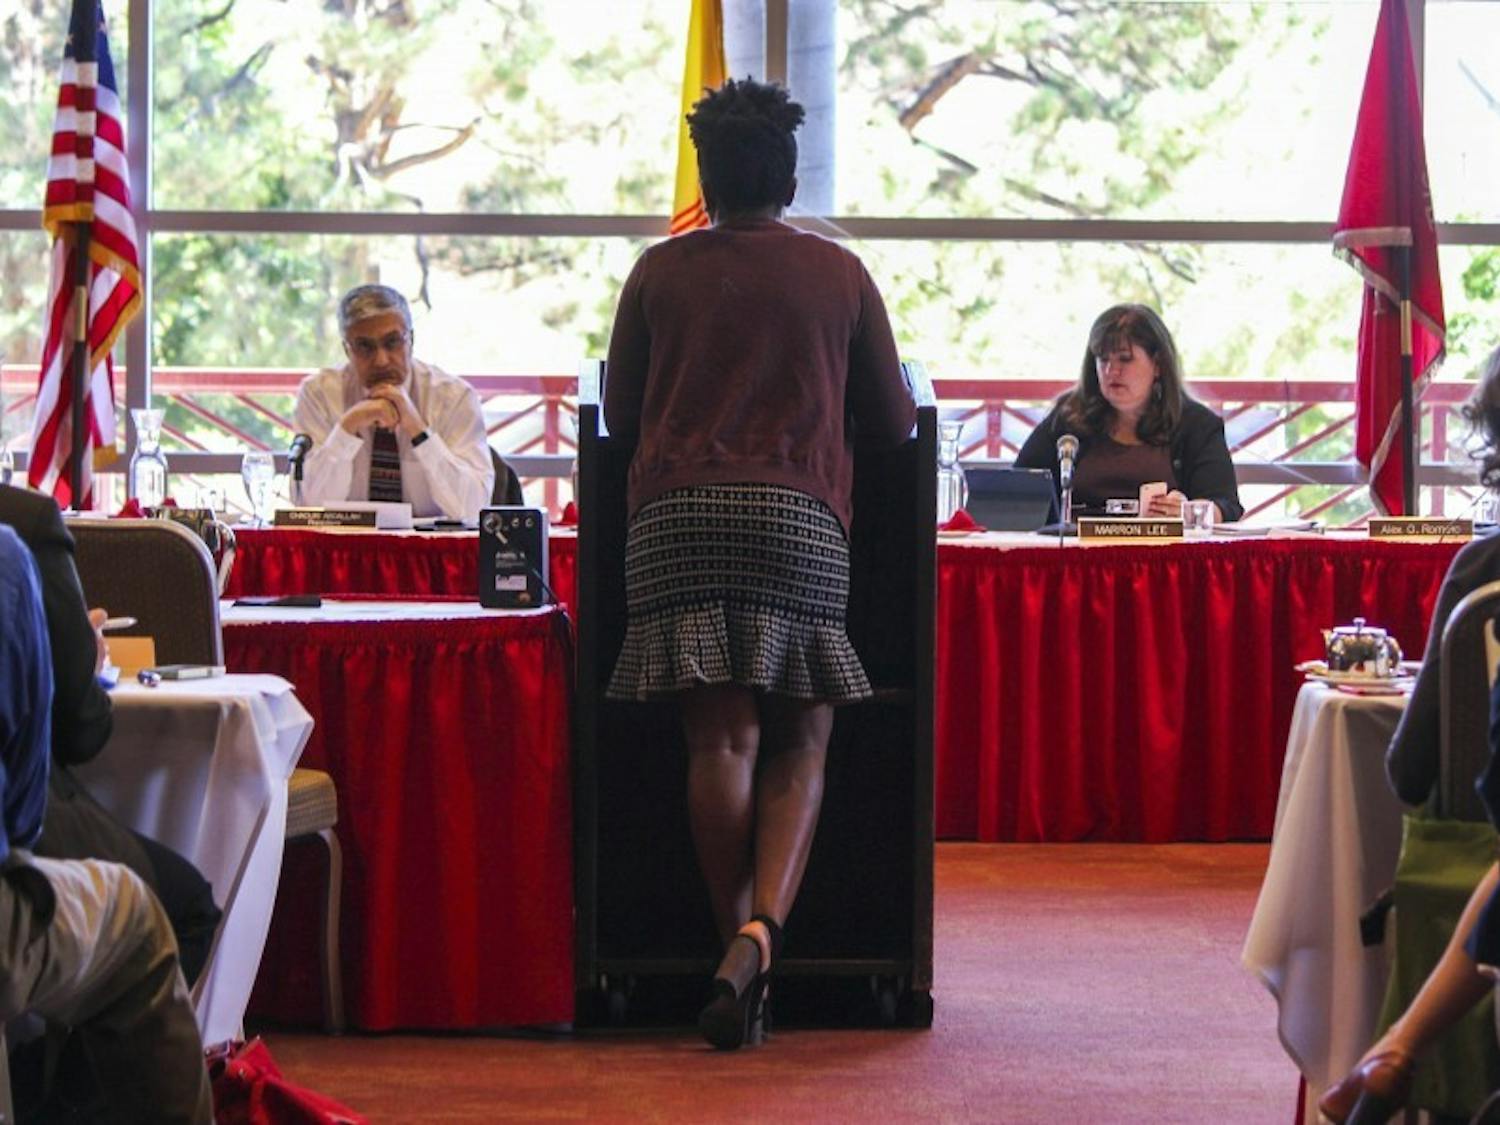 Students and UNM faculty voice their opinions on topics ranging from budget cuts to other items on the agenda during the public comments portion of the Board of Regents meeting onJune 13, 2017 in the SUB.